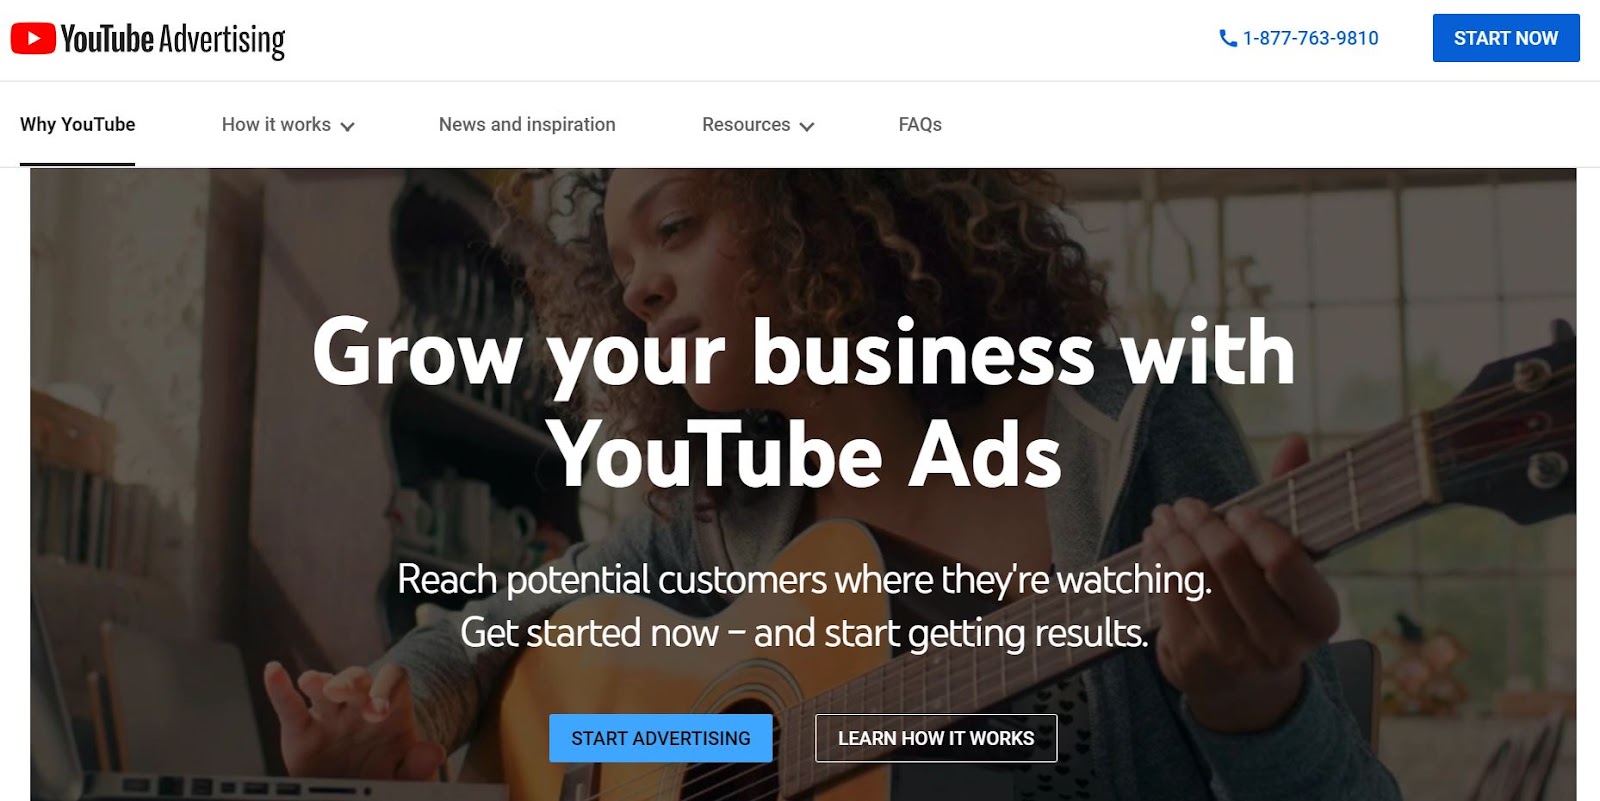 YouTube advertising linked to Google Ads account